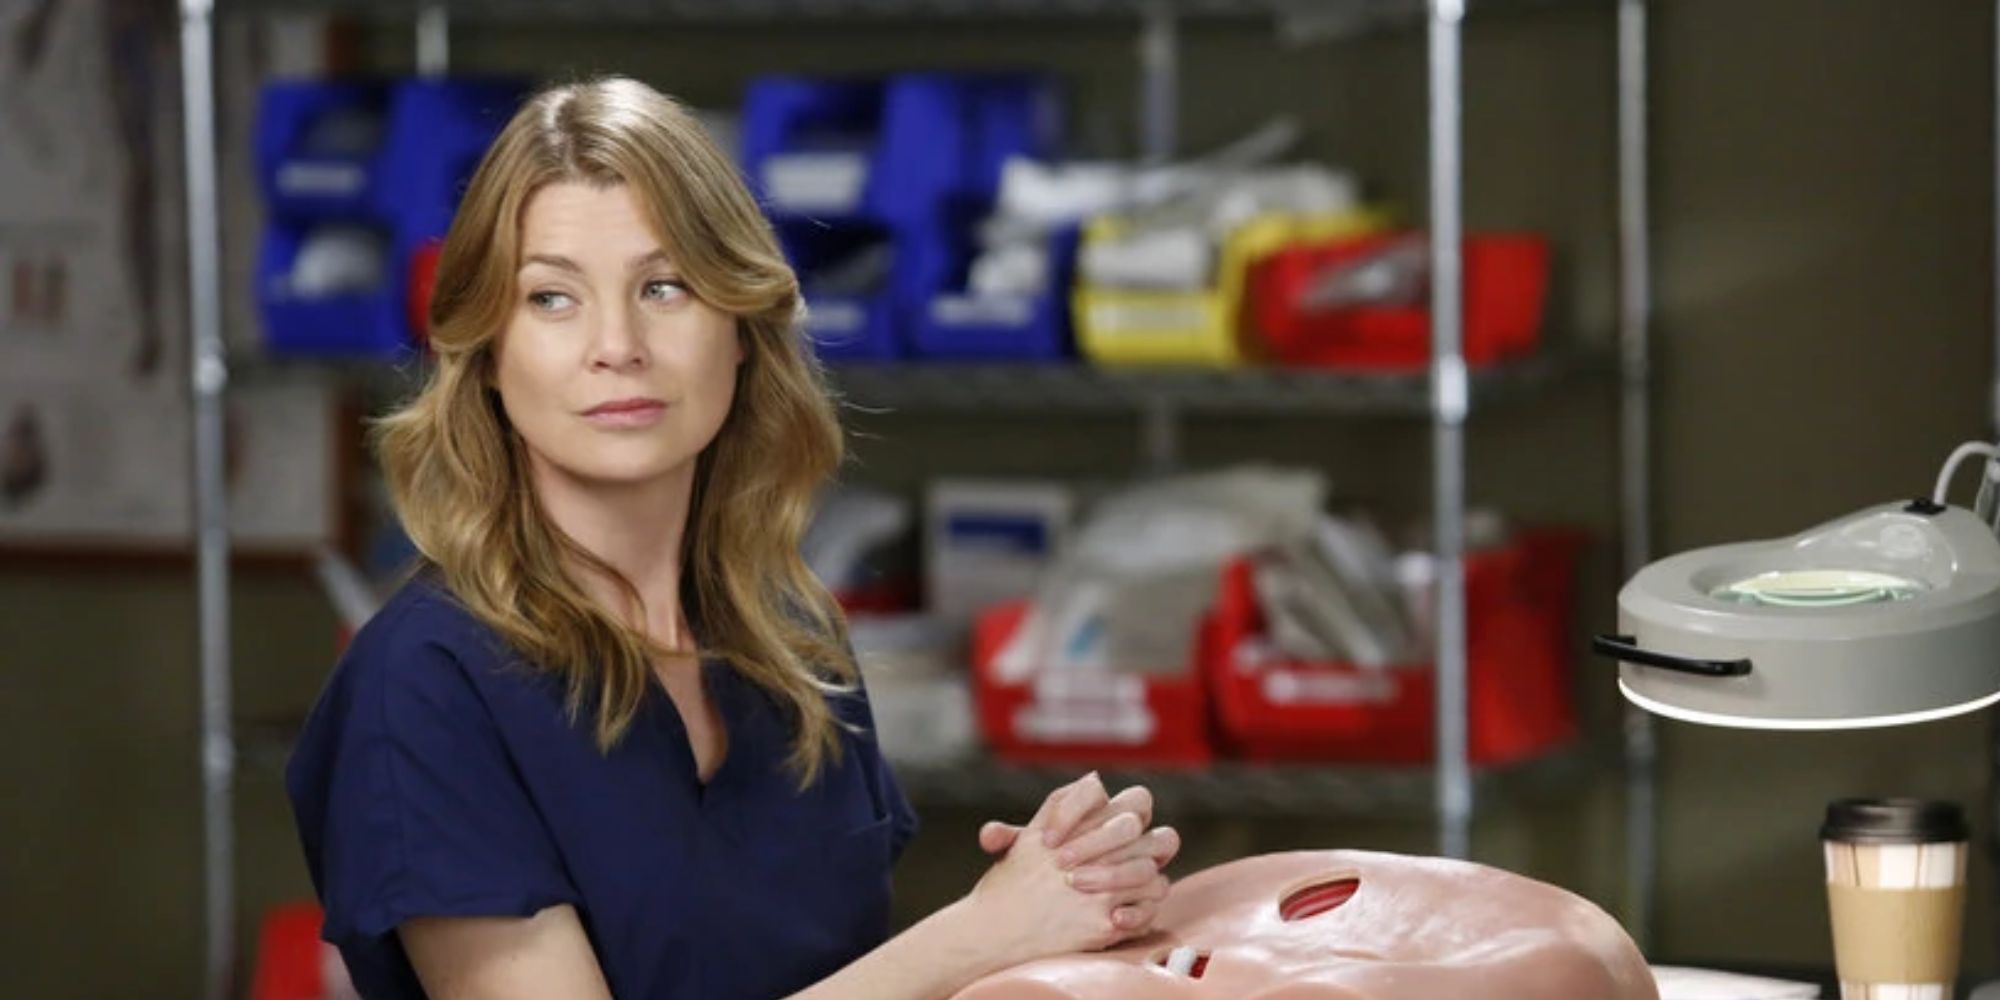 Meredith Grey is in her scrubs in Grey's Anatomy.